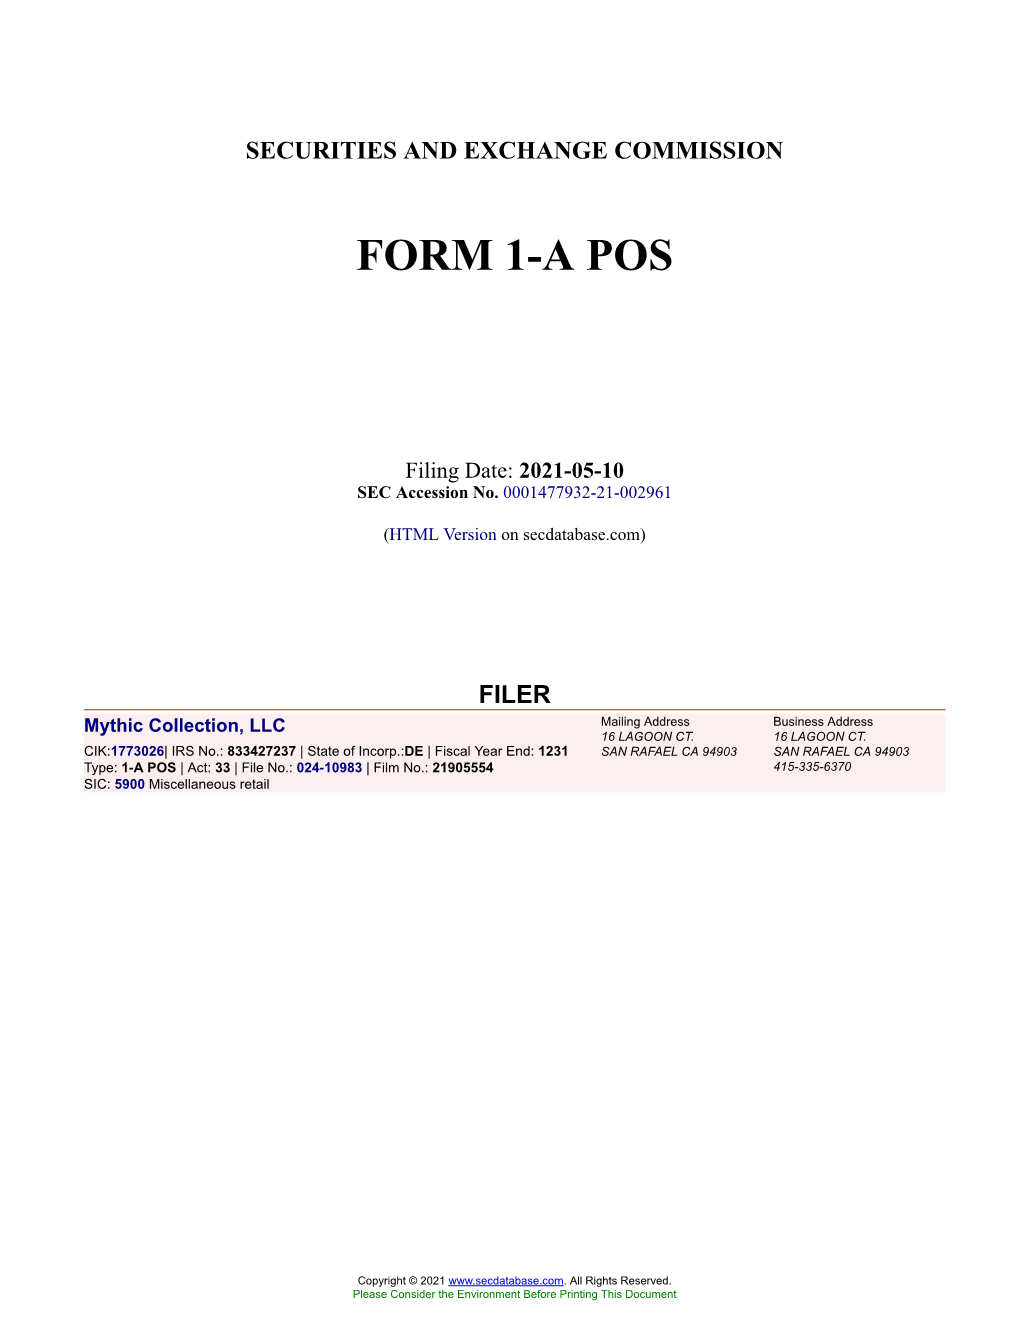 Mythic Collection, LLC Form 1-A POS Filed 2021-05